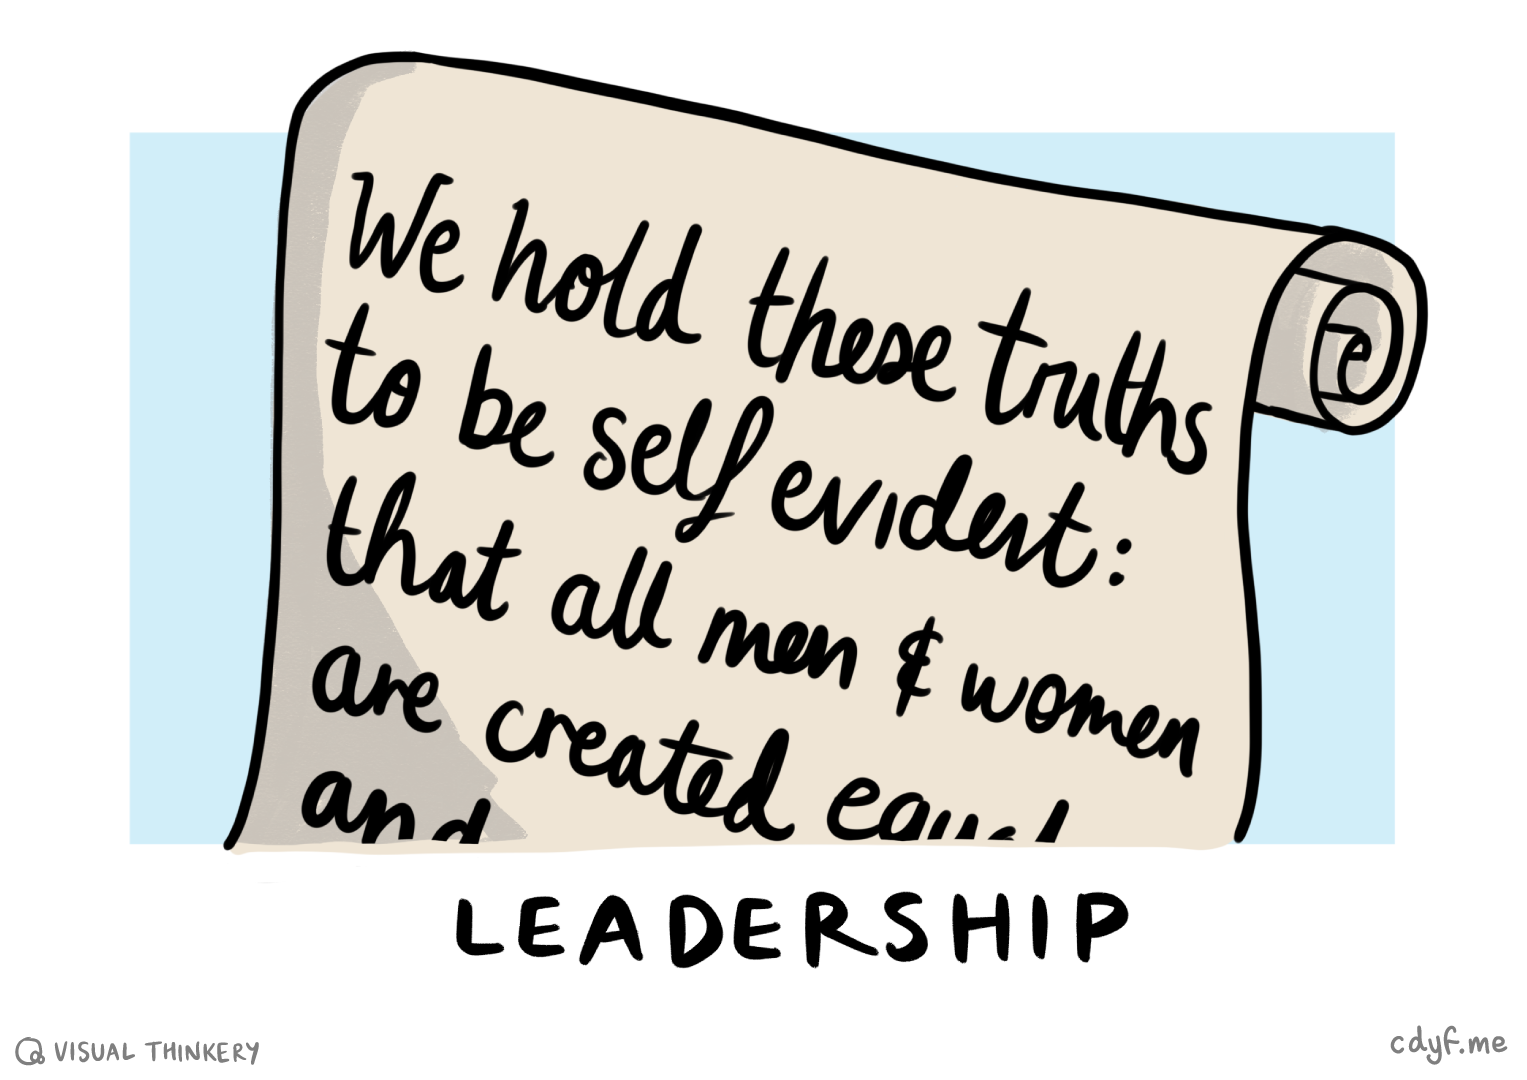 We hold these truths to be self-evident, that all men (and women) are created equal… Just words written down on a piece of paper, but words that made people follow. (Jefferson et al. 1776) Declaration sketch by Visual Thinkery is licensed under CC-BY-ND